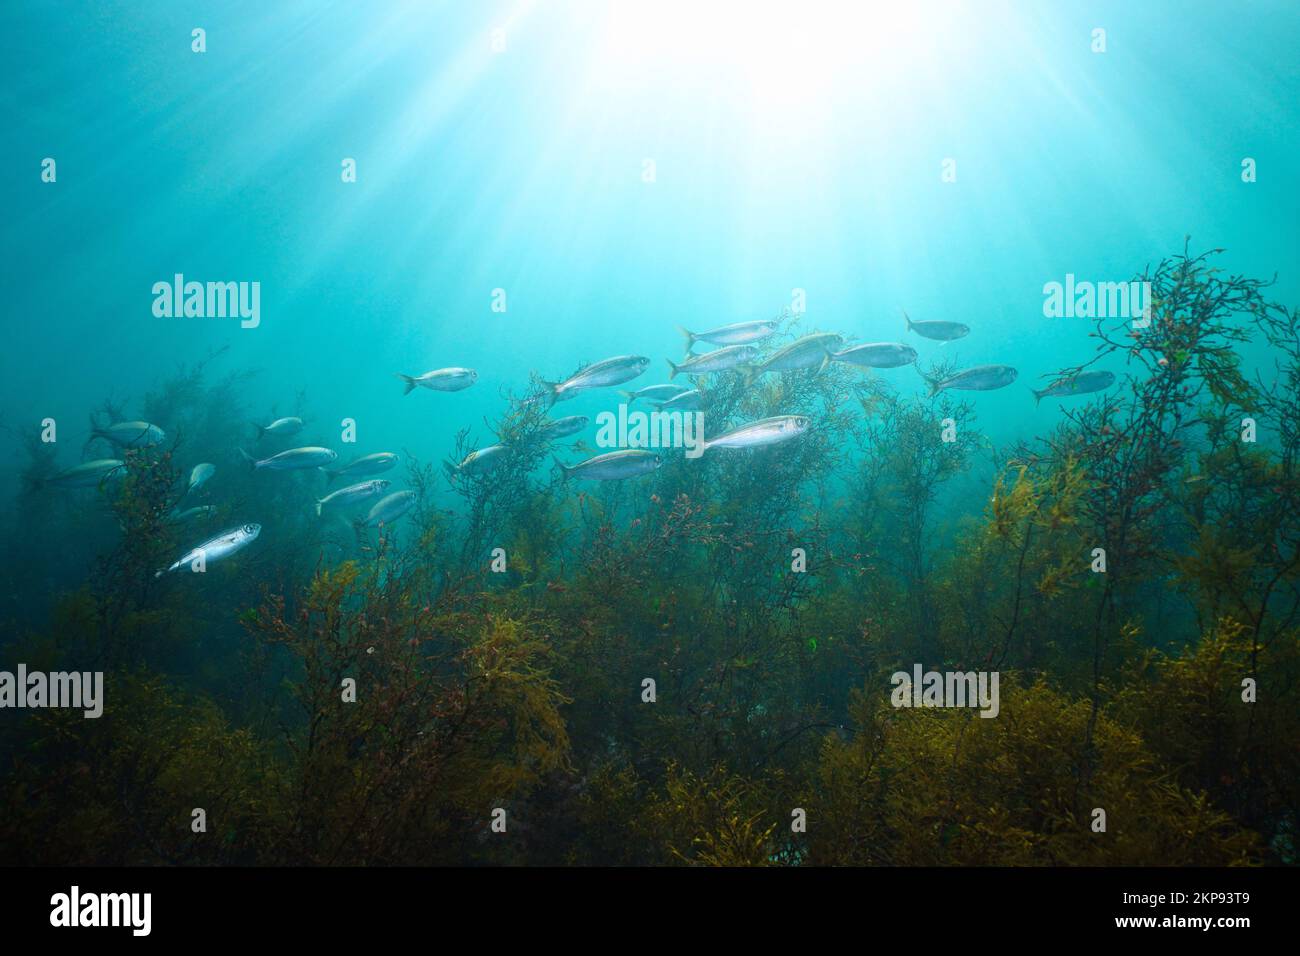 Sunlight underwater with bogue fish and algae in the ocean, Eastern Atlantic, Spain, Galicia Stock Photo